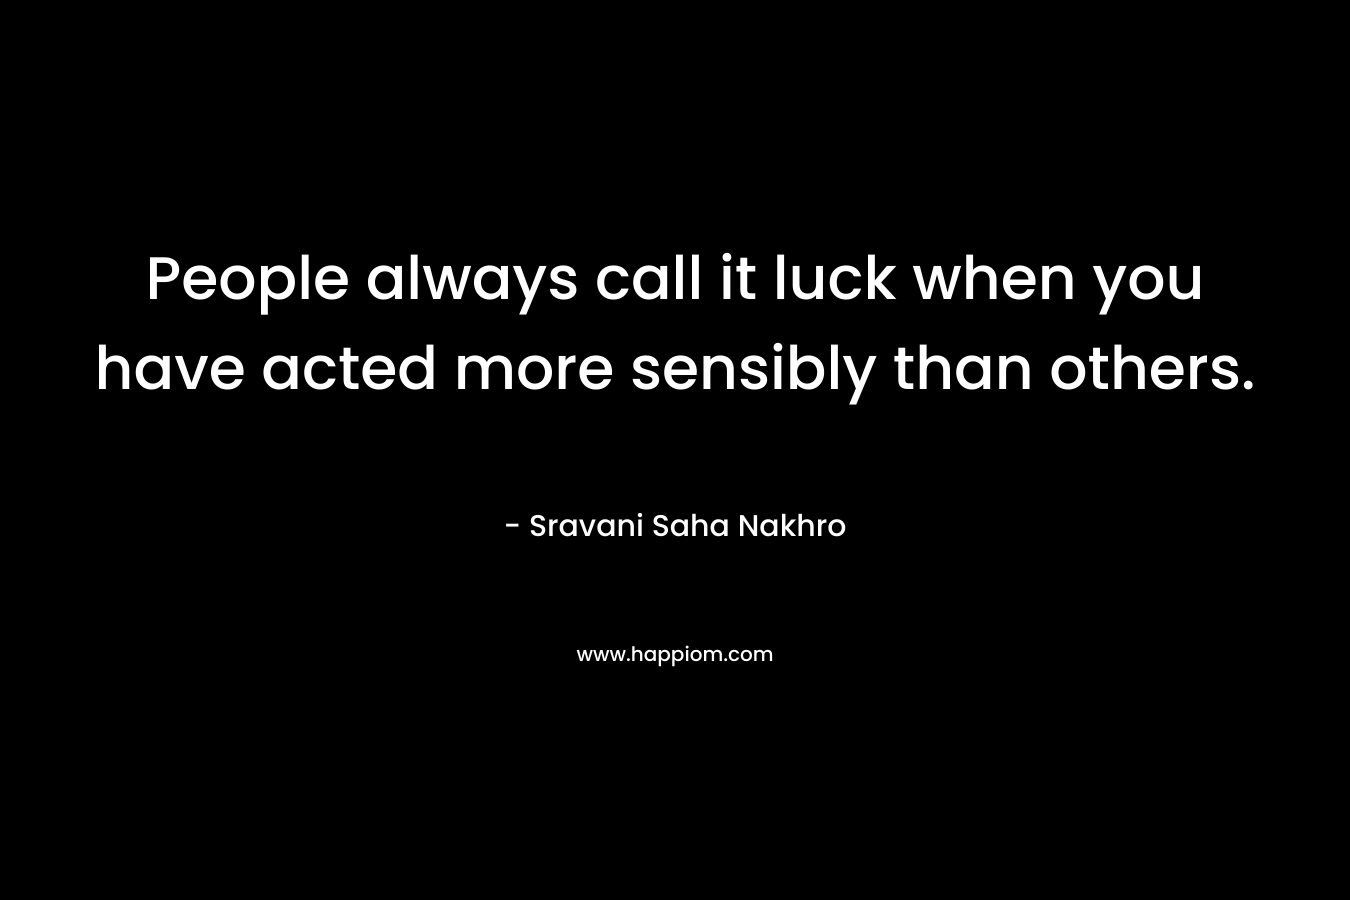 People always call it luck when you have acted more sensibly than others.